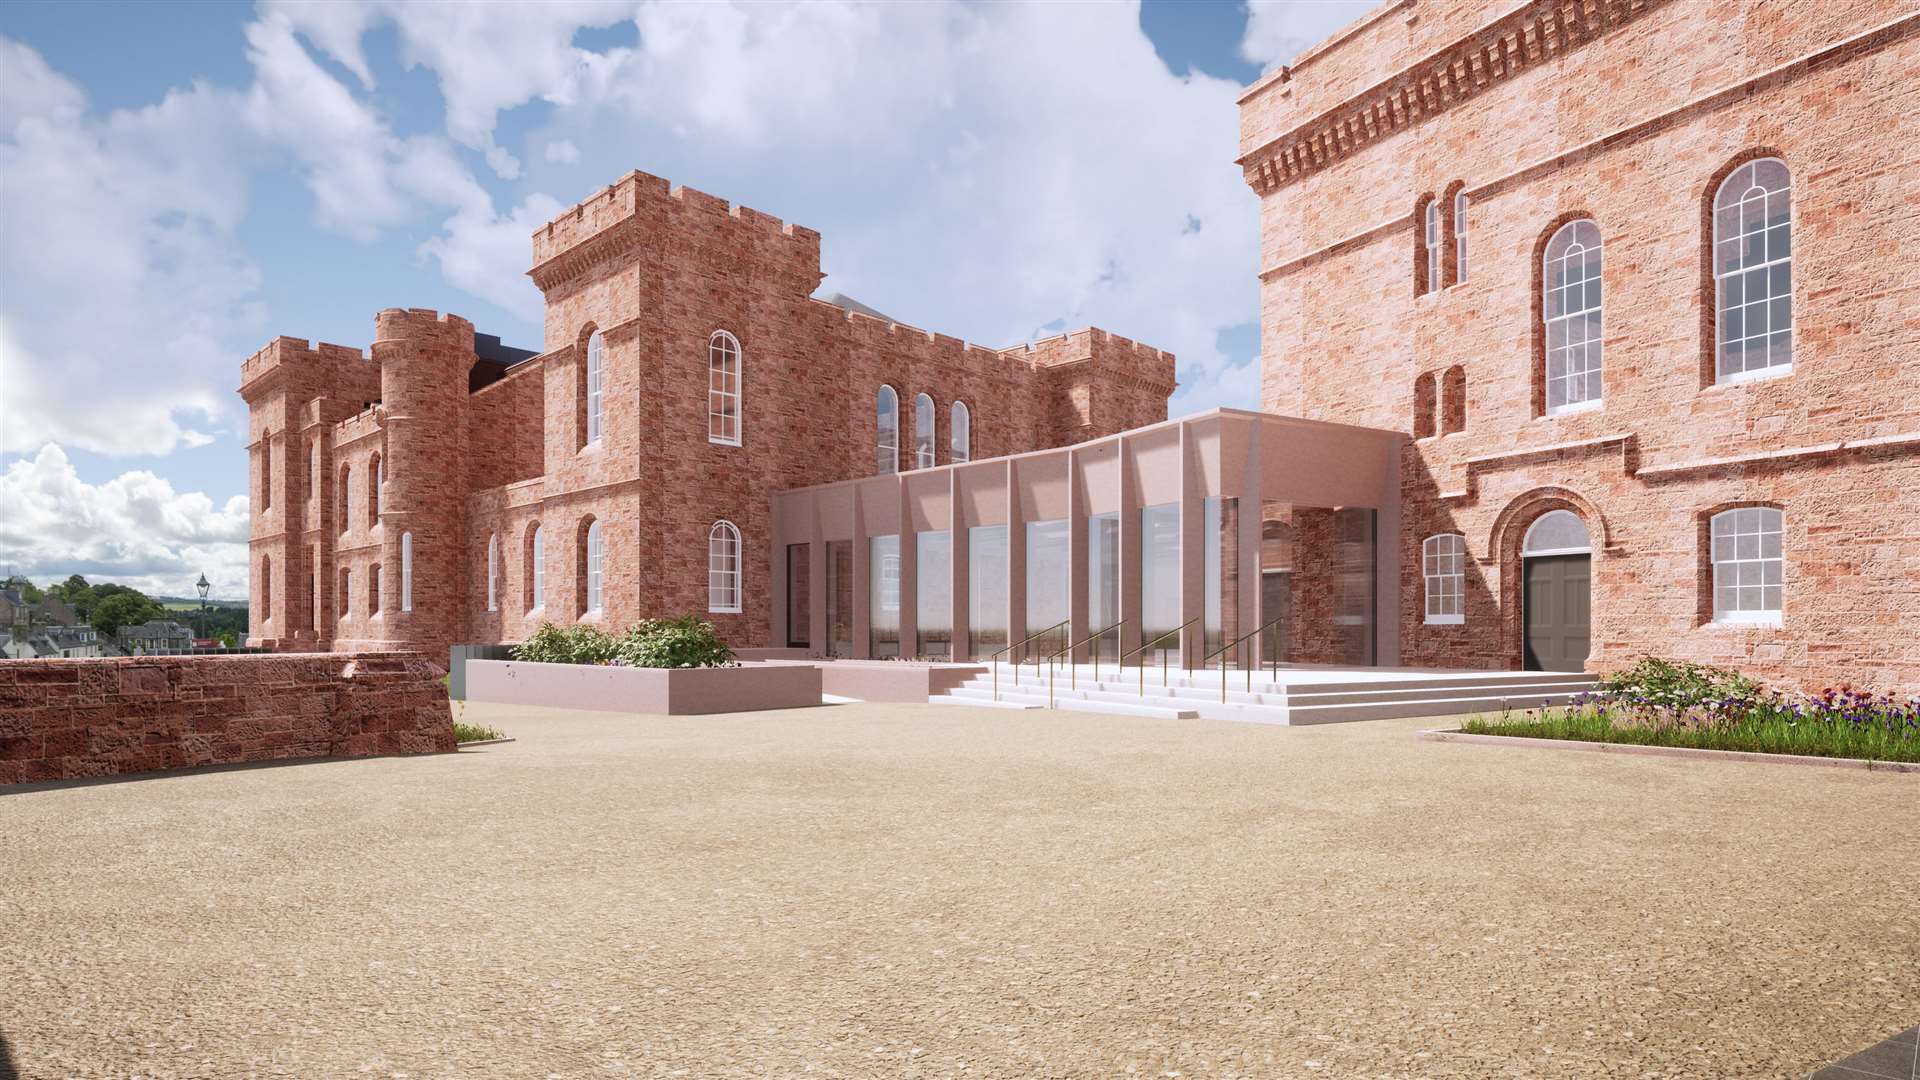 An artist's impression of the transformation of Inverness Castle.